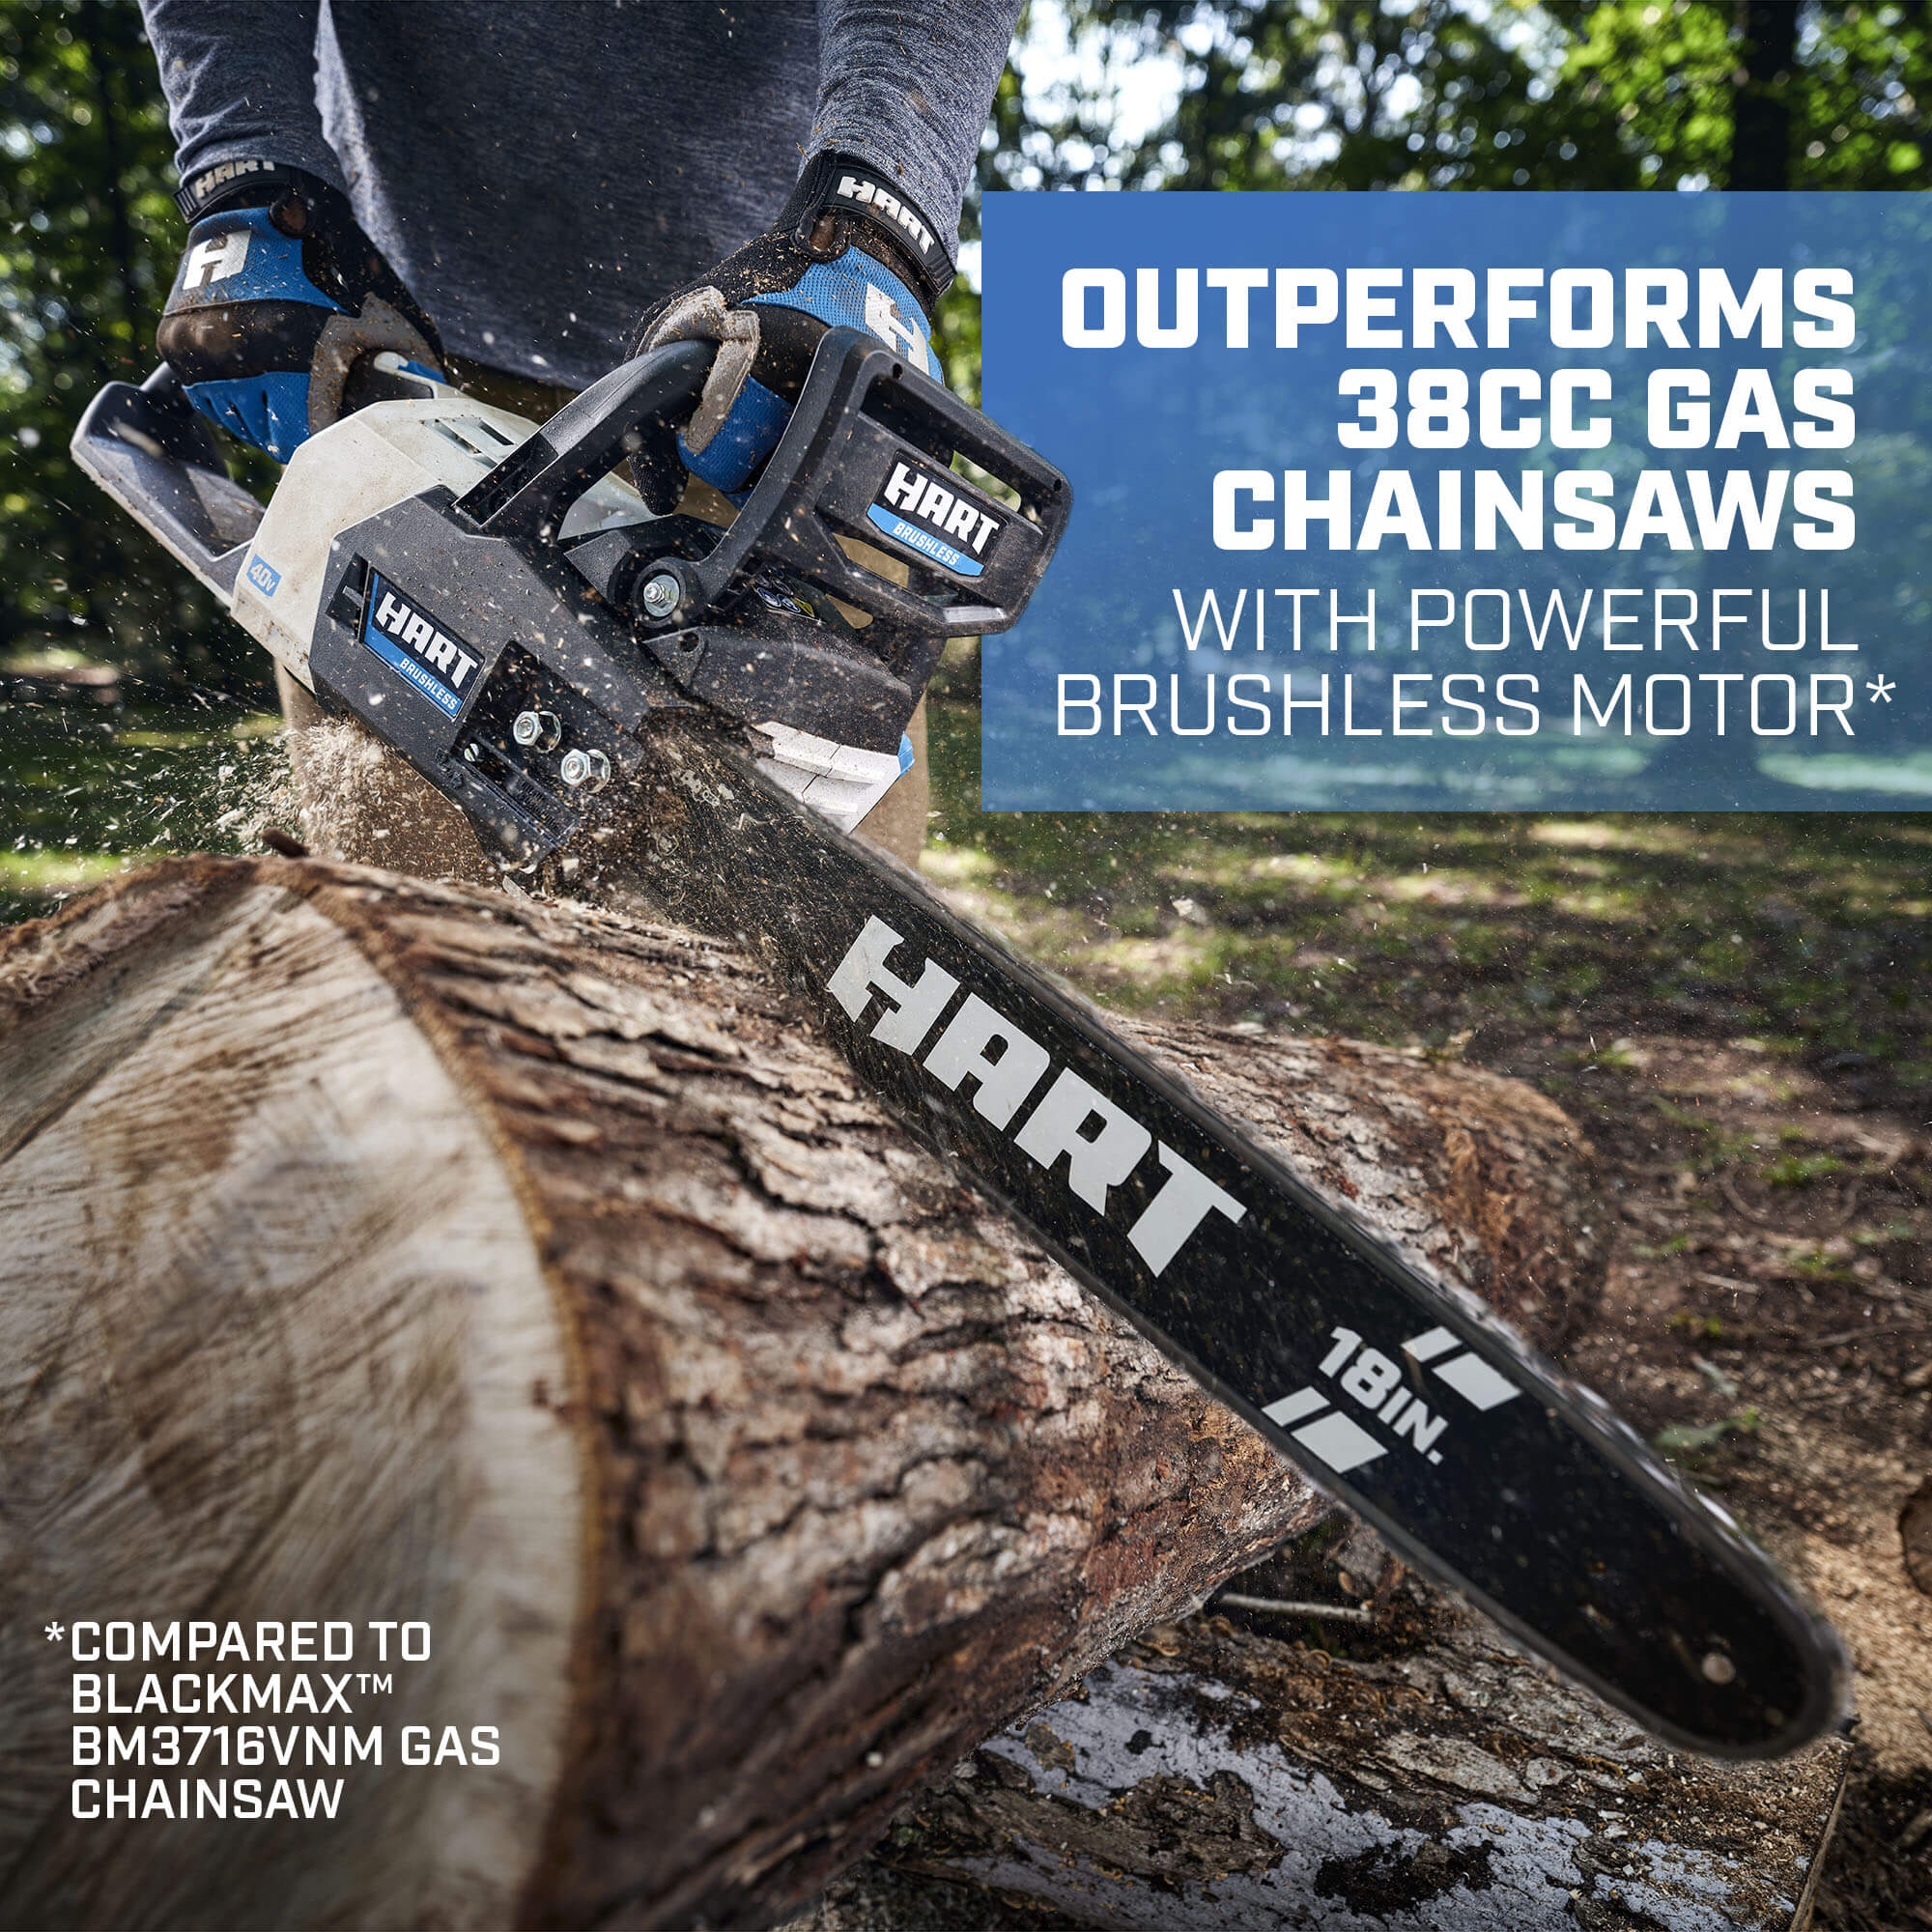 outperforms 38cc gas chainsaws with powerful brushless motor